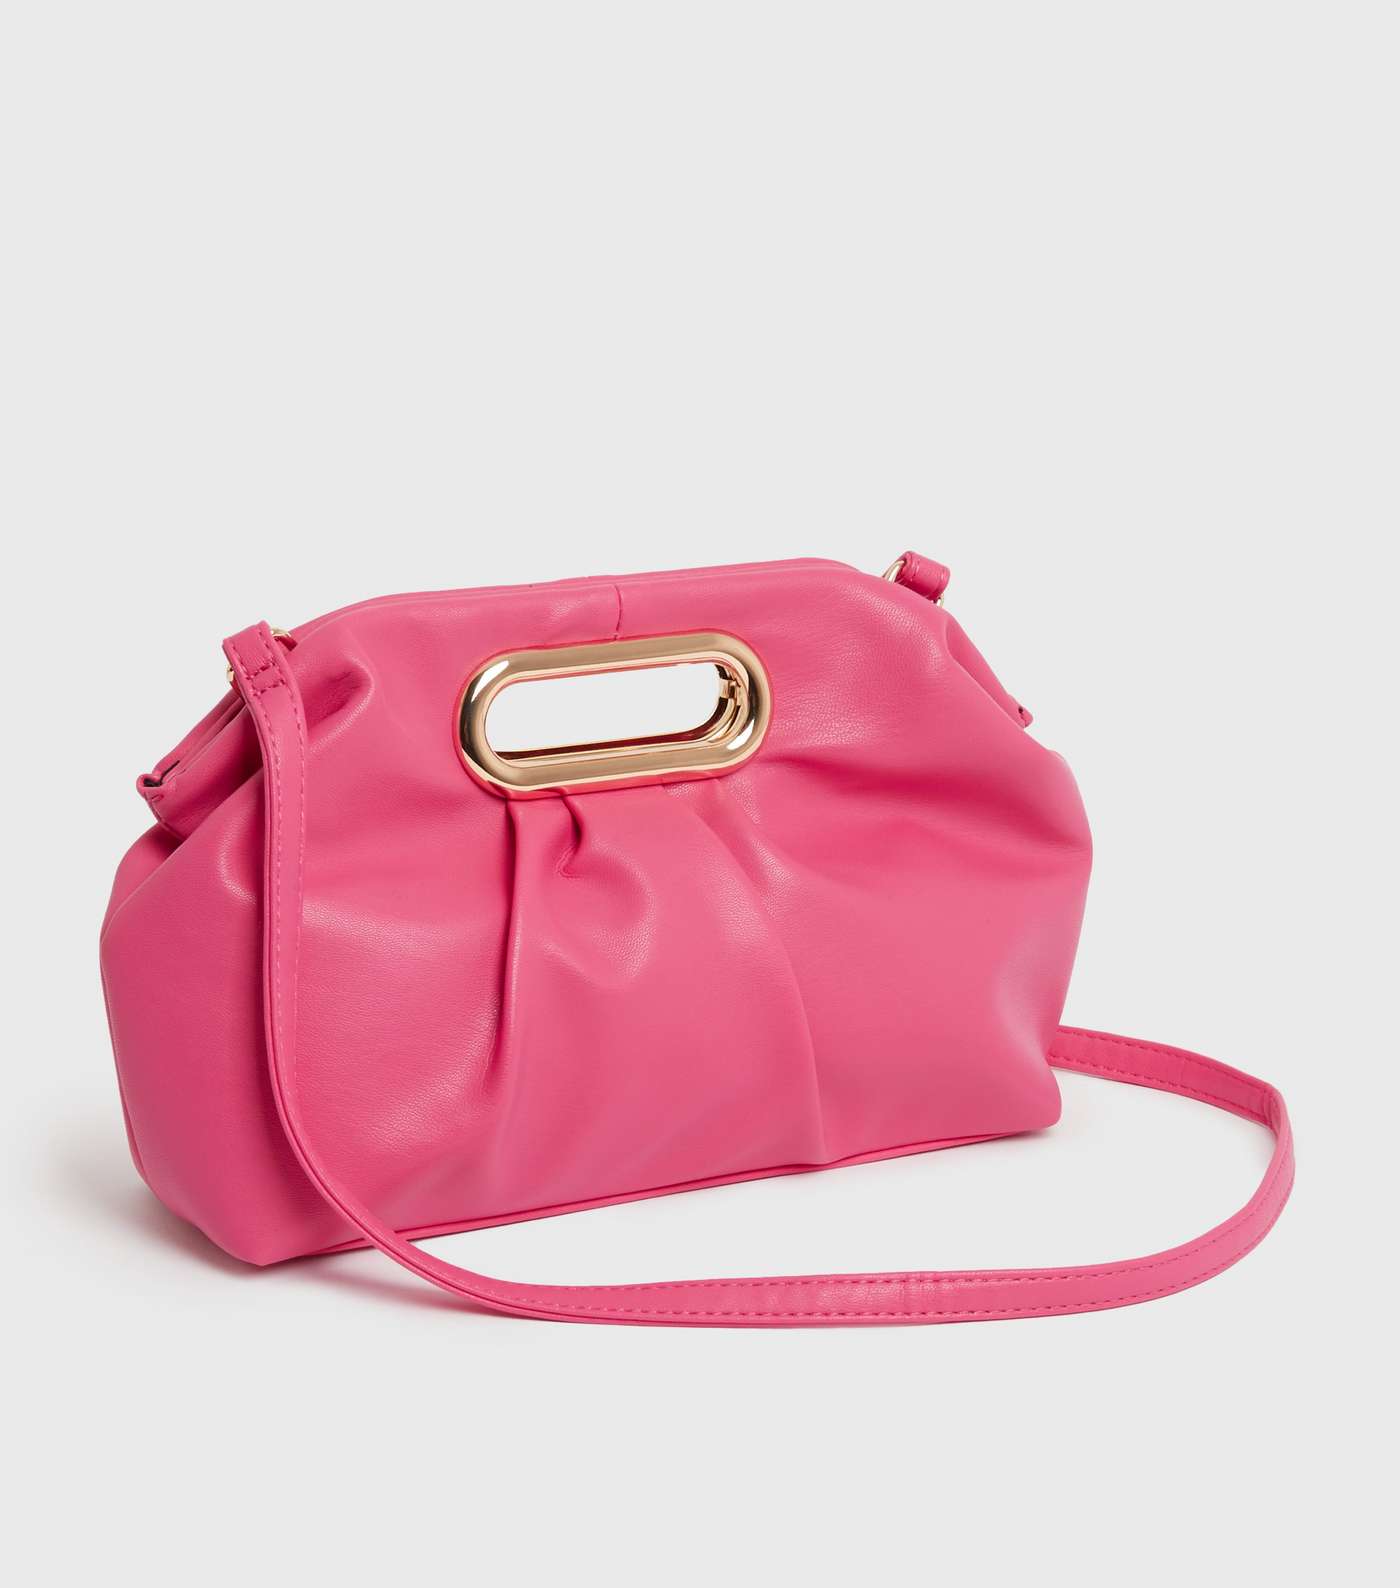 Bright Pink Leather-Look Ruched Clutch Bag Image 3